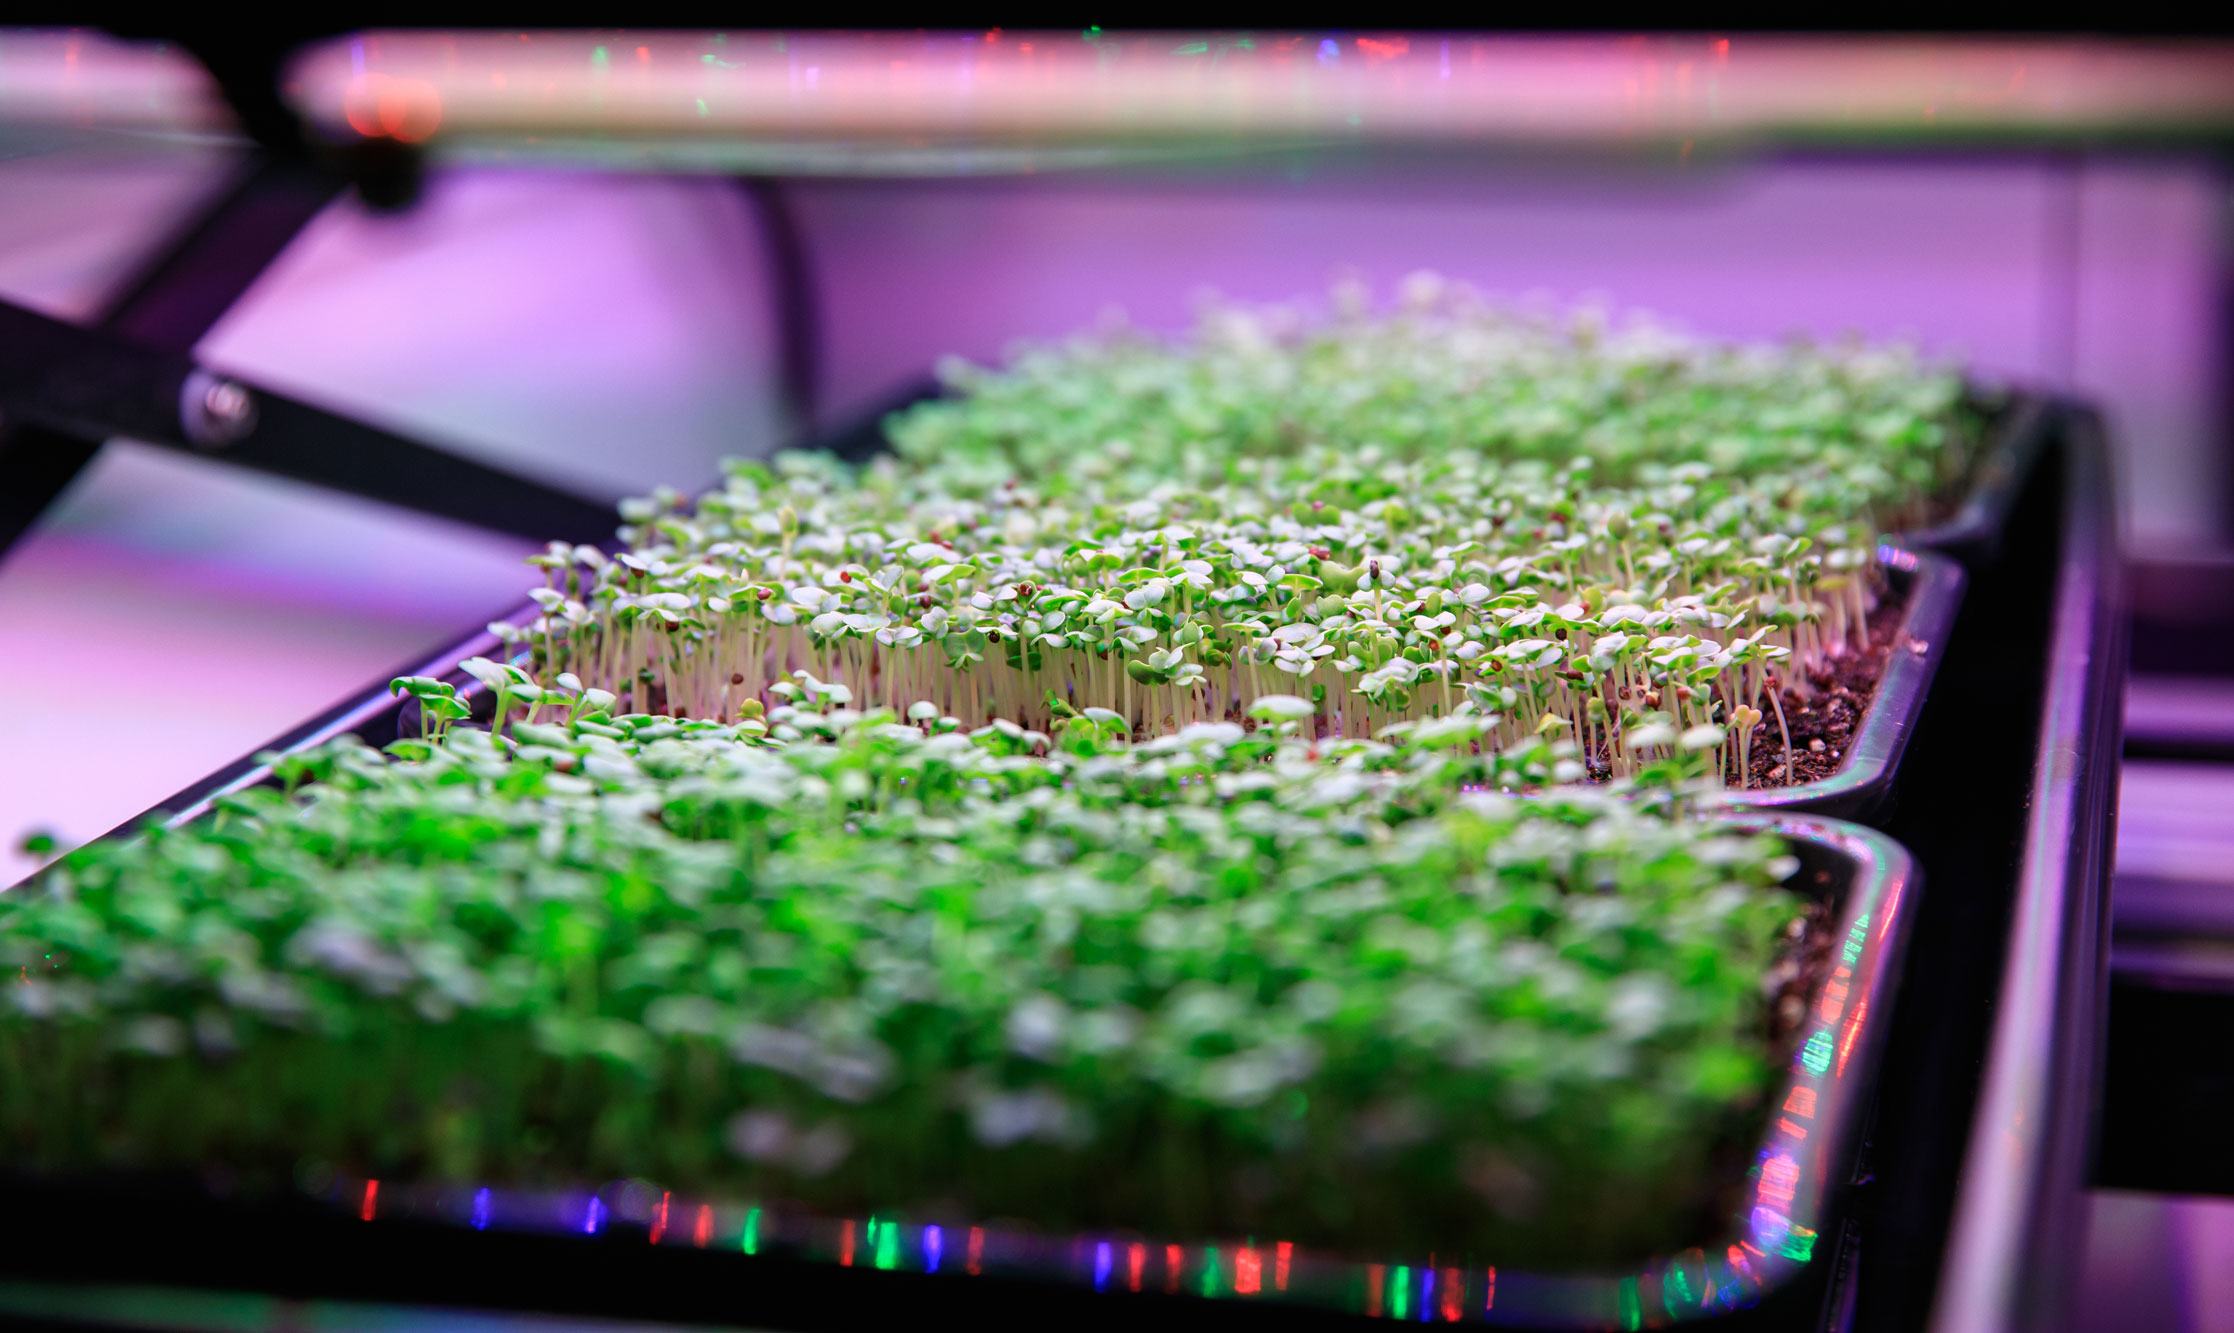 Nutritious microgreens are grown  at NASA’s Kennedy Space Center in Florida, USA.